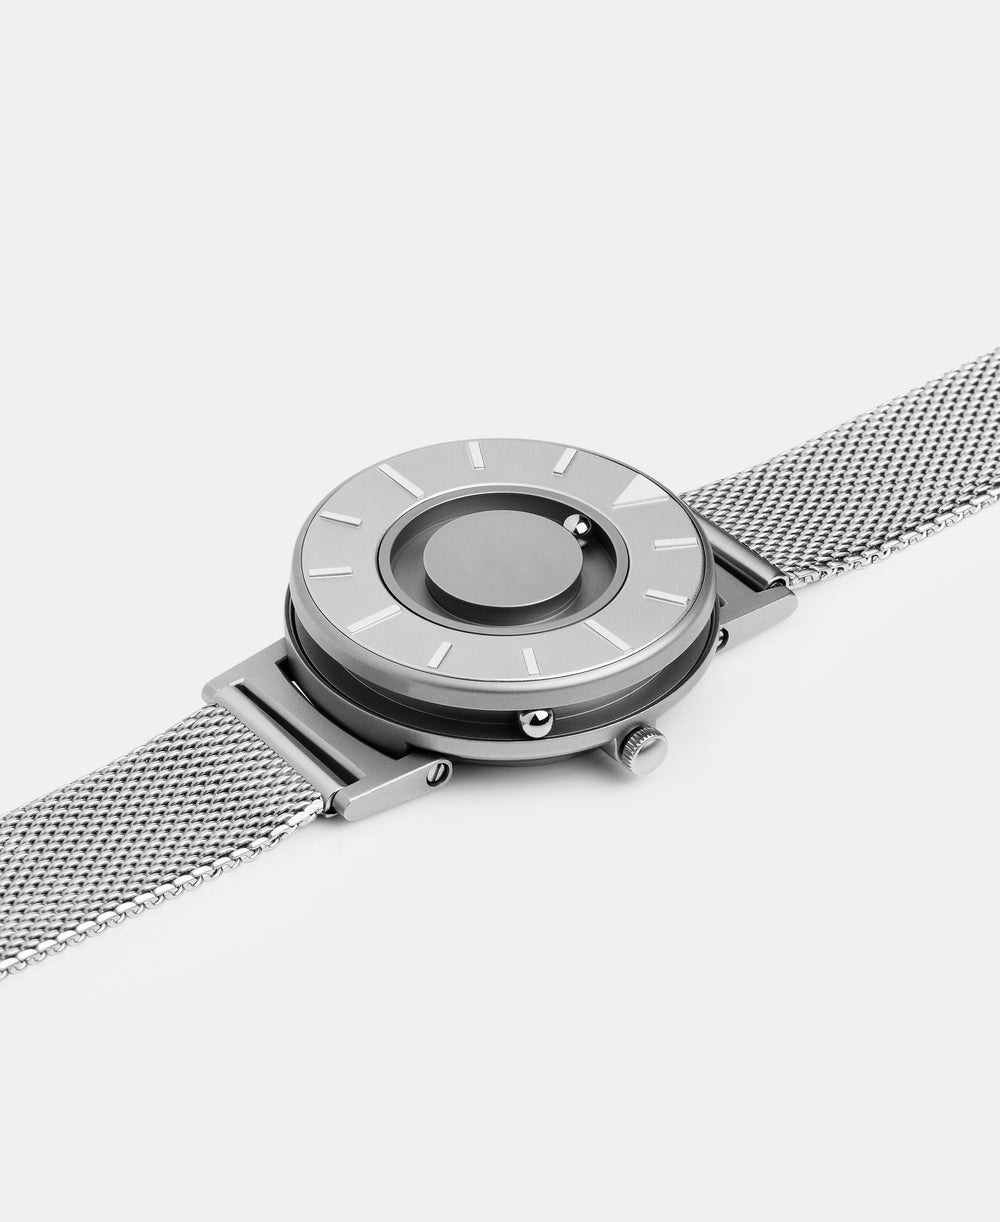 A photo of the watch lying flat on a surface. The recessed track around the outside of the watch face is shown with the hour ball bearing in the track. The raised markers are noticeable from this perspective.